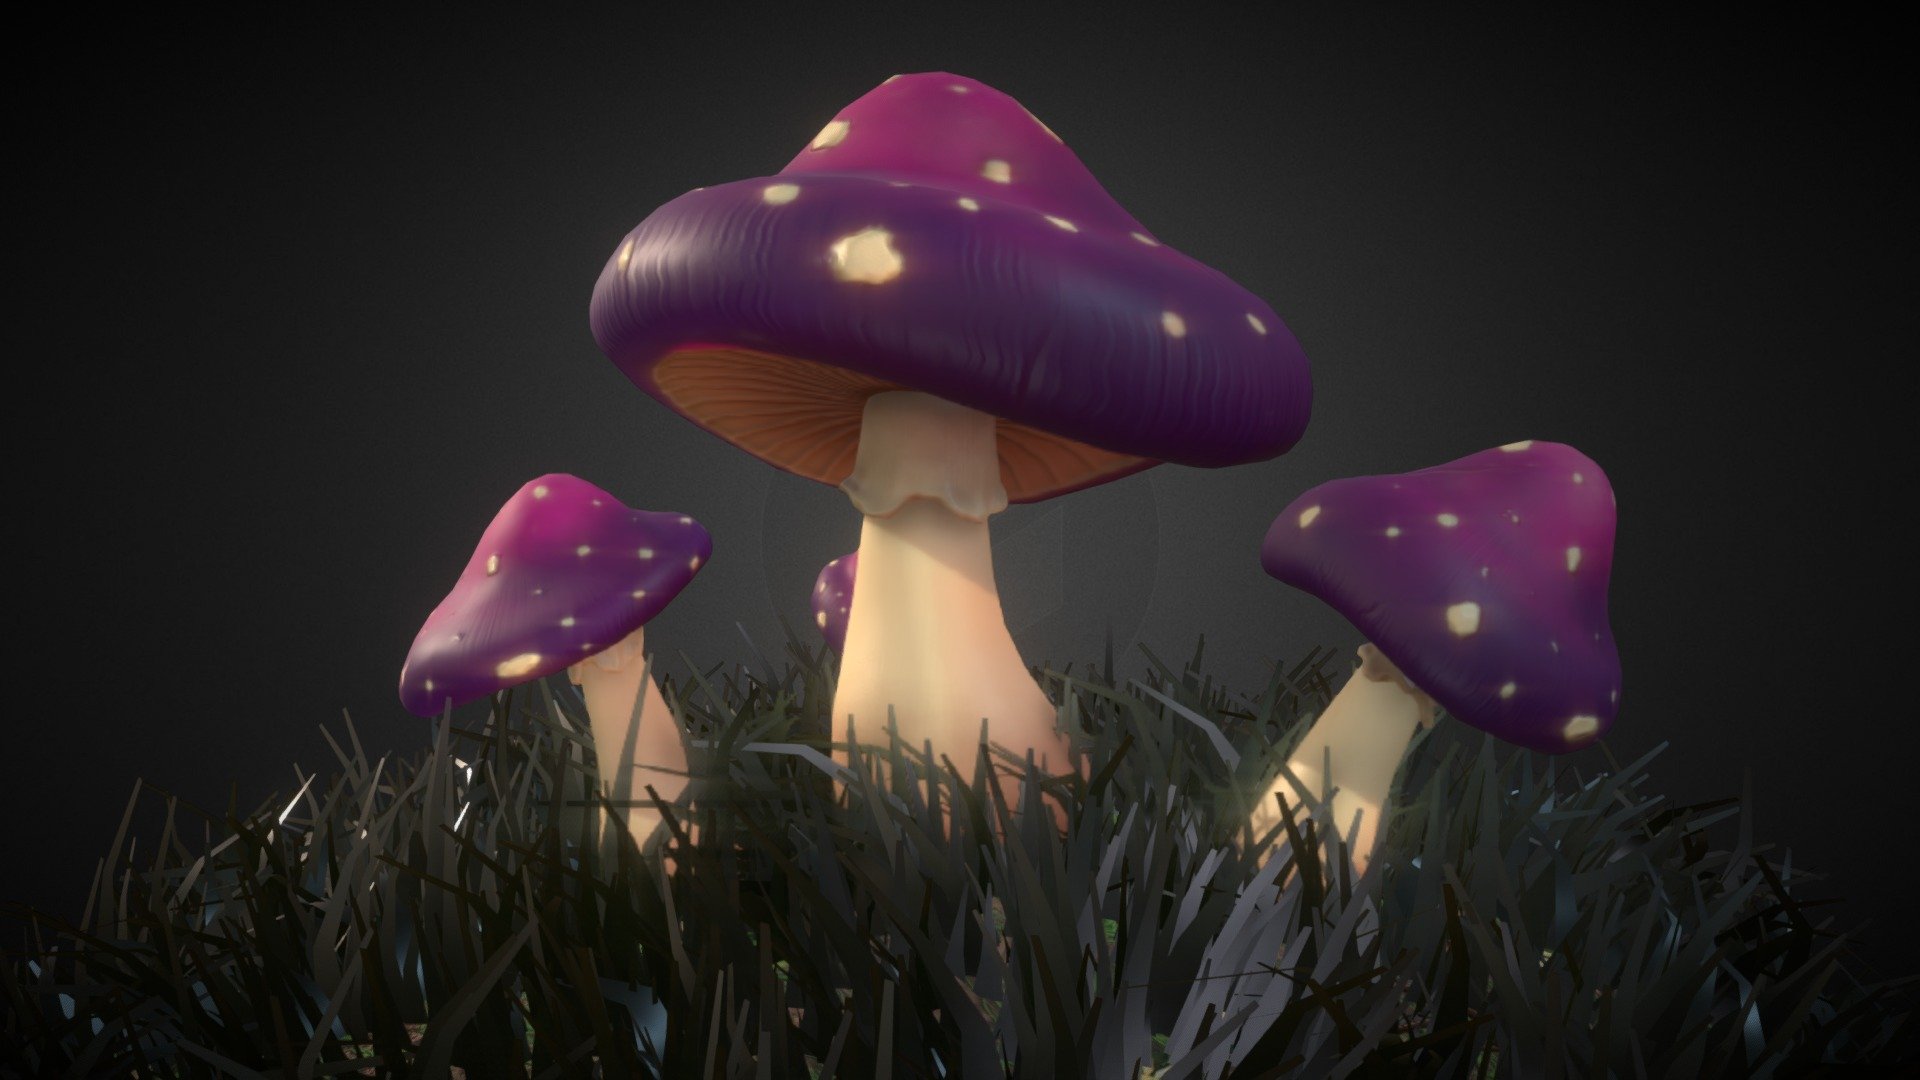 Scene with cartoon mushrooms 
I have more here https://skfb.ly/opBzS take a look please - Cartoon mushrooms - 3D model by Sergey Egelsky (@egelsky) 3d model